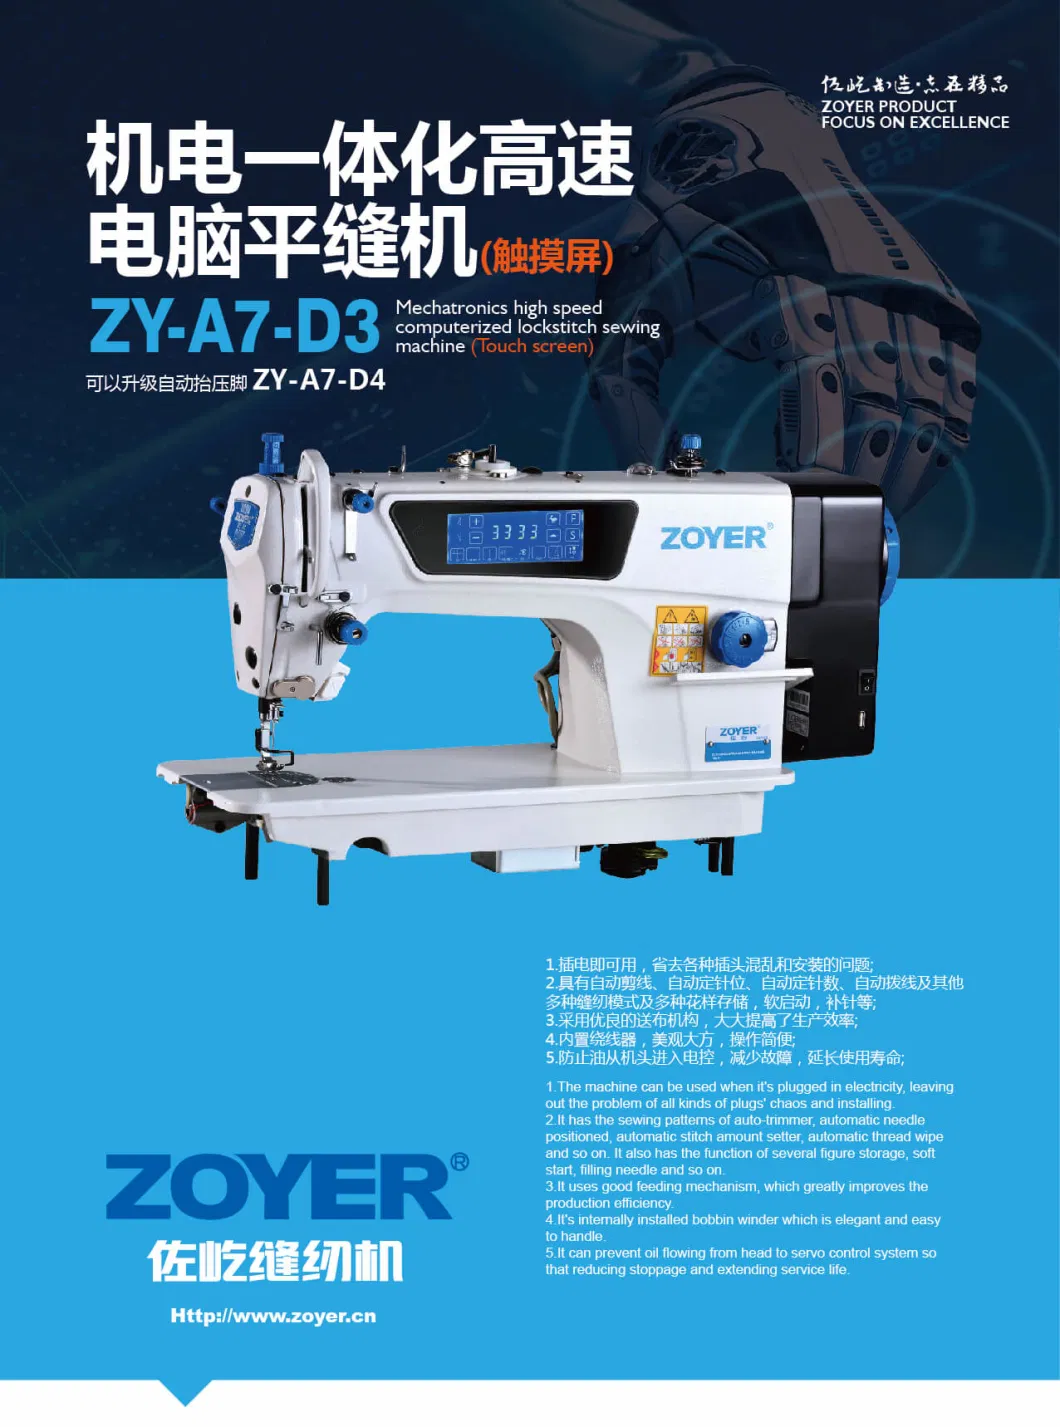 Full Automatic Zy-A7-D4 Zoyer Direct Drive Auto Trimmer Lockstitch Industrial Sewing Machine